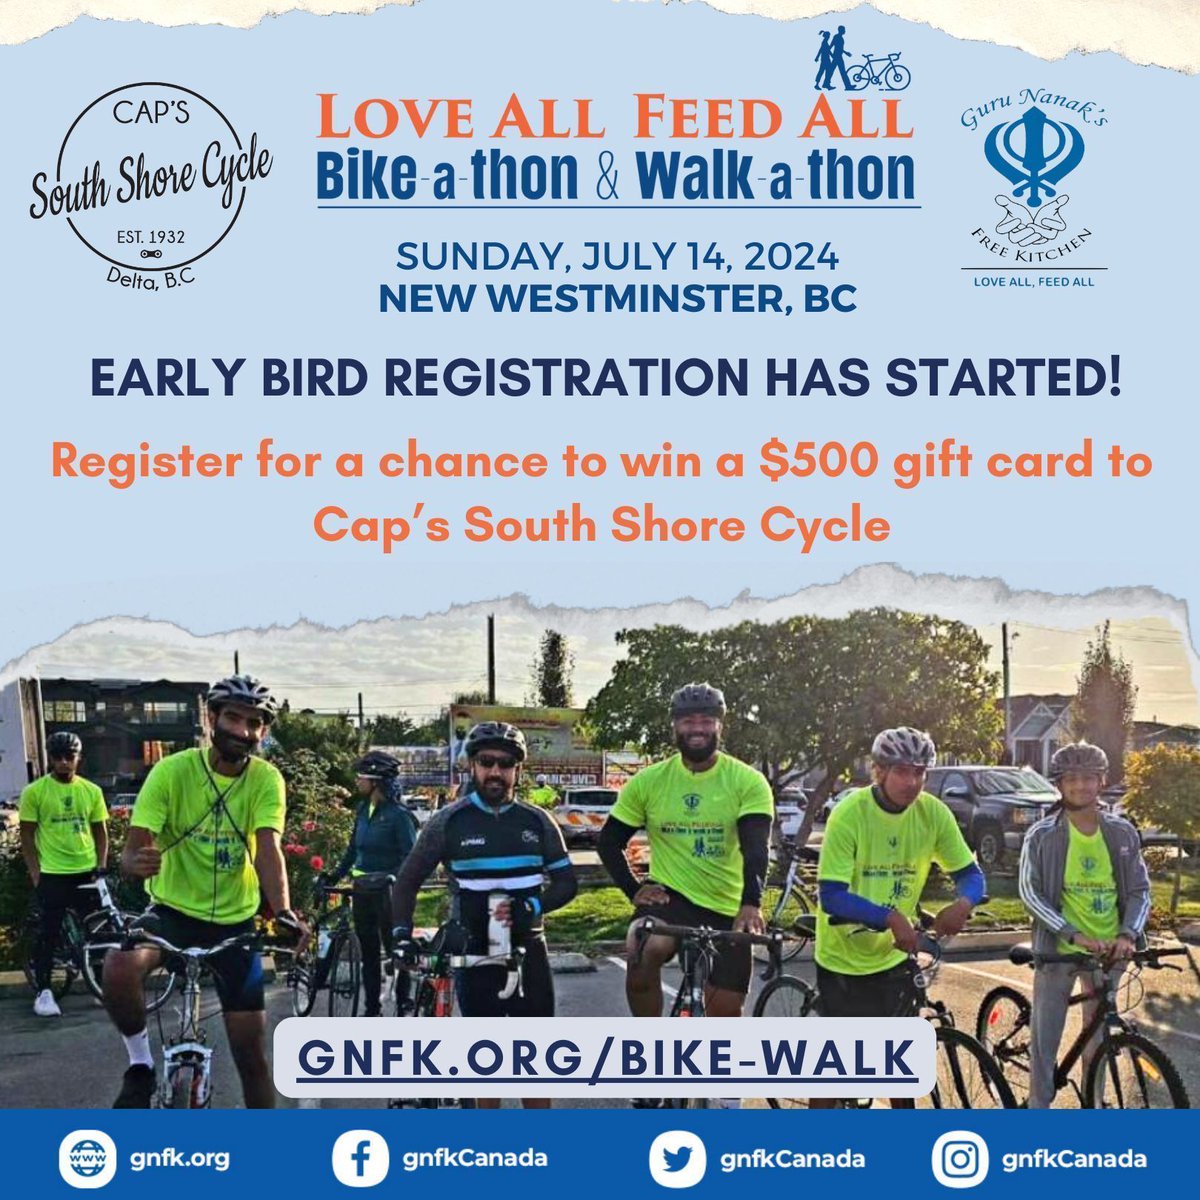 Early bird registration is open for our 4th Annual Bike and Walk-A-Thon! Register now to be entered into a draw for a $500 gift card at @CapsSouthShore! Go to gnfk.org/bike-walk or use the QR code below to join a team or sign up as an individual. #bikeathon #walkathon